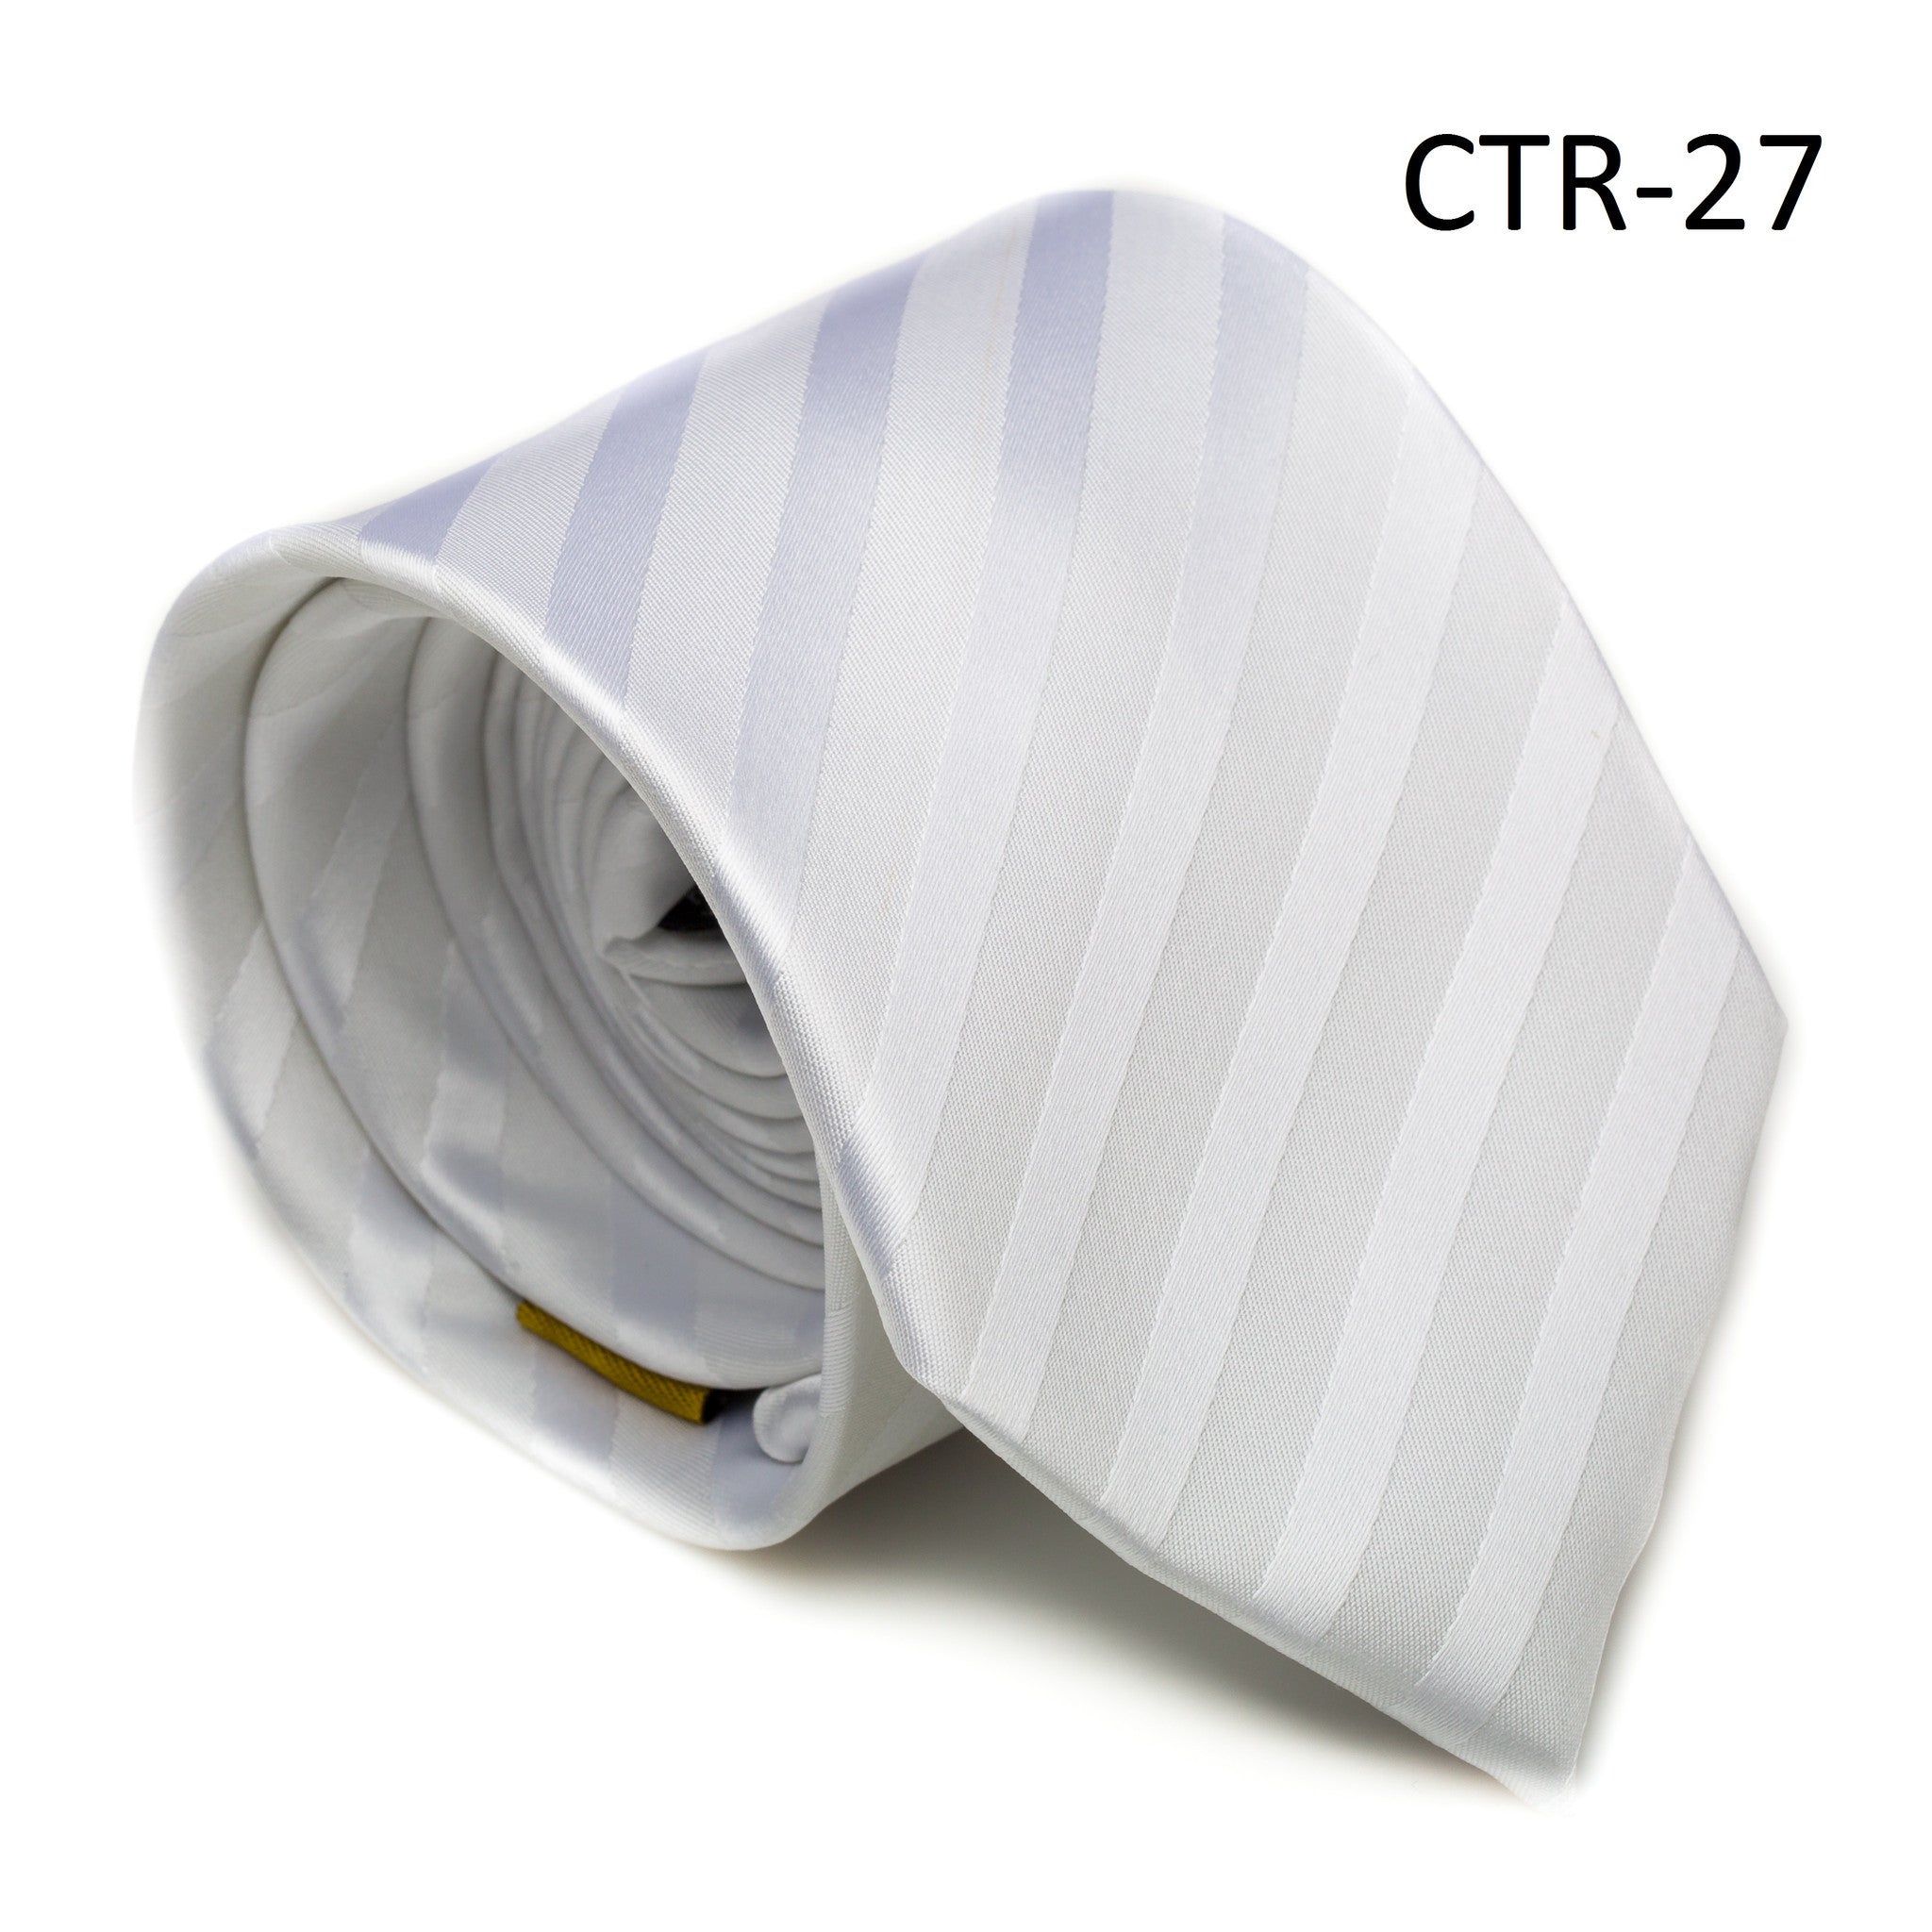 White Temple/ Baptism Tie by CTR Clothing - The Kater Shop - 3